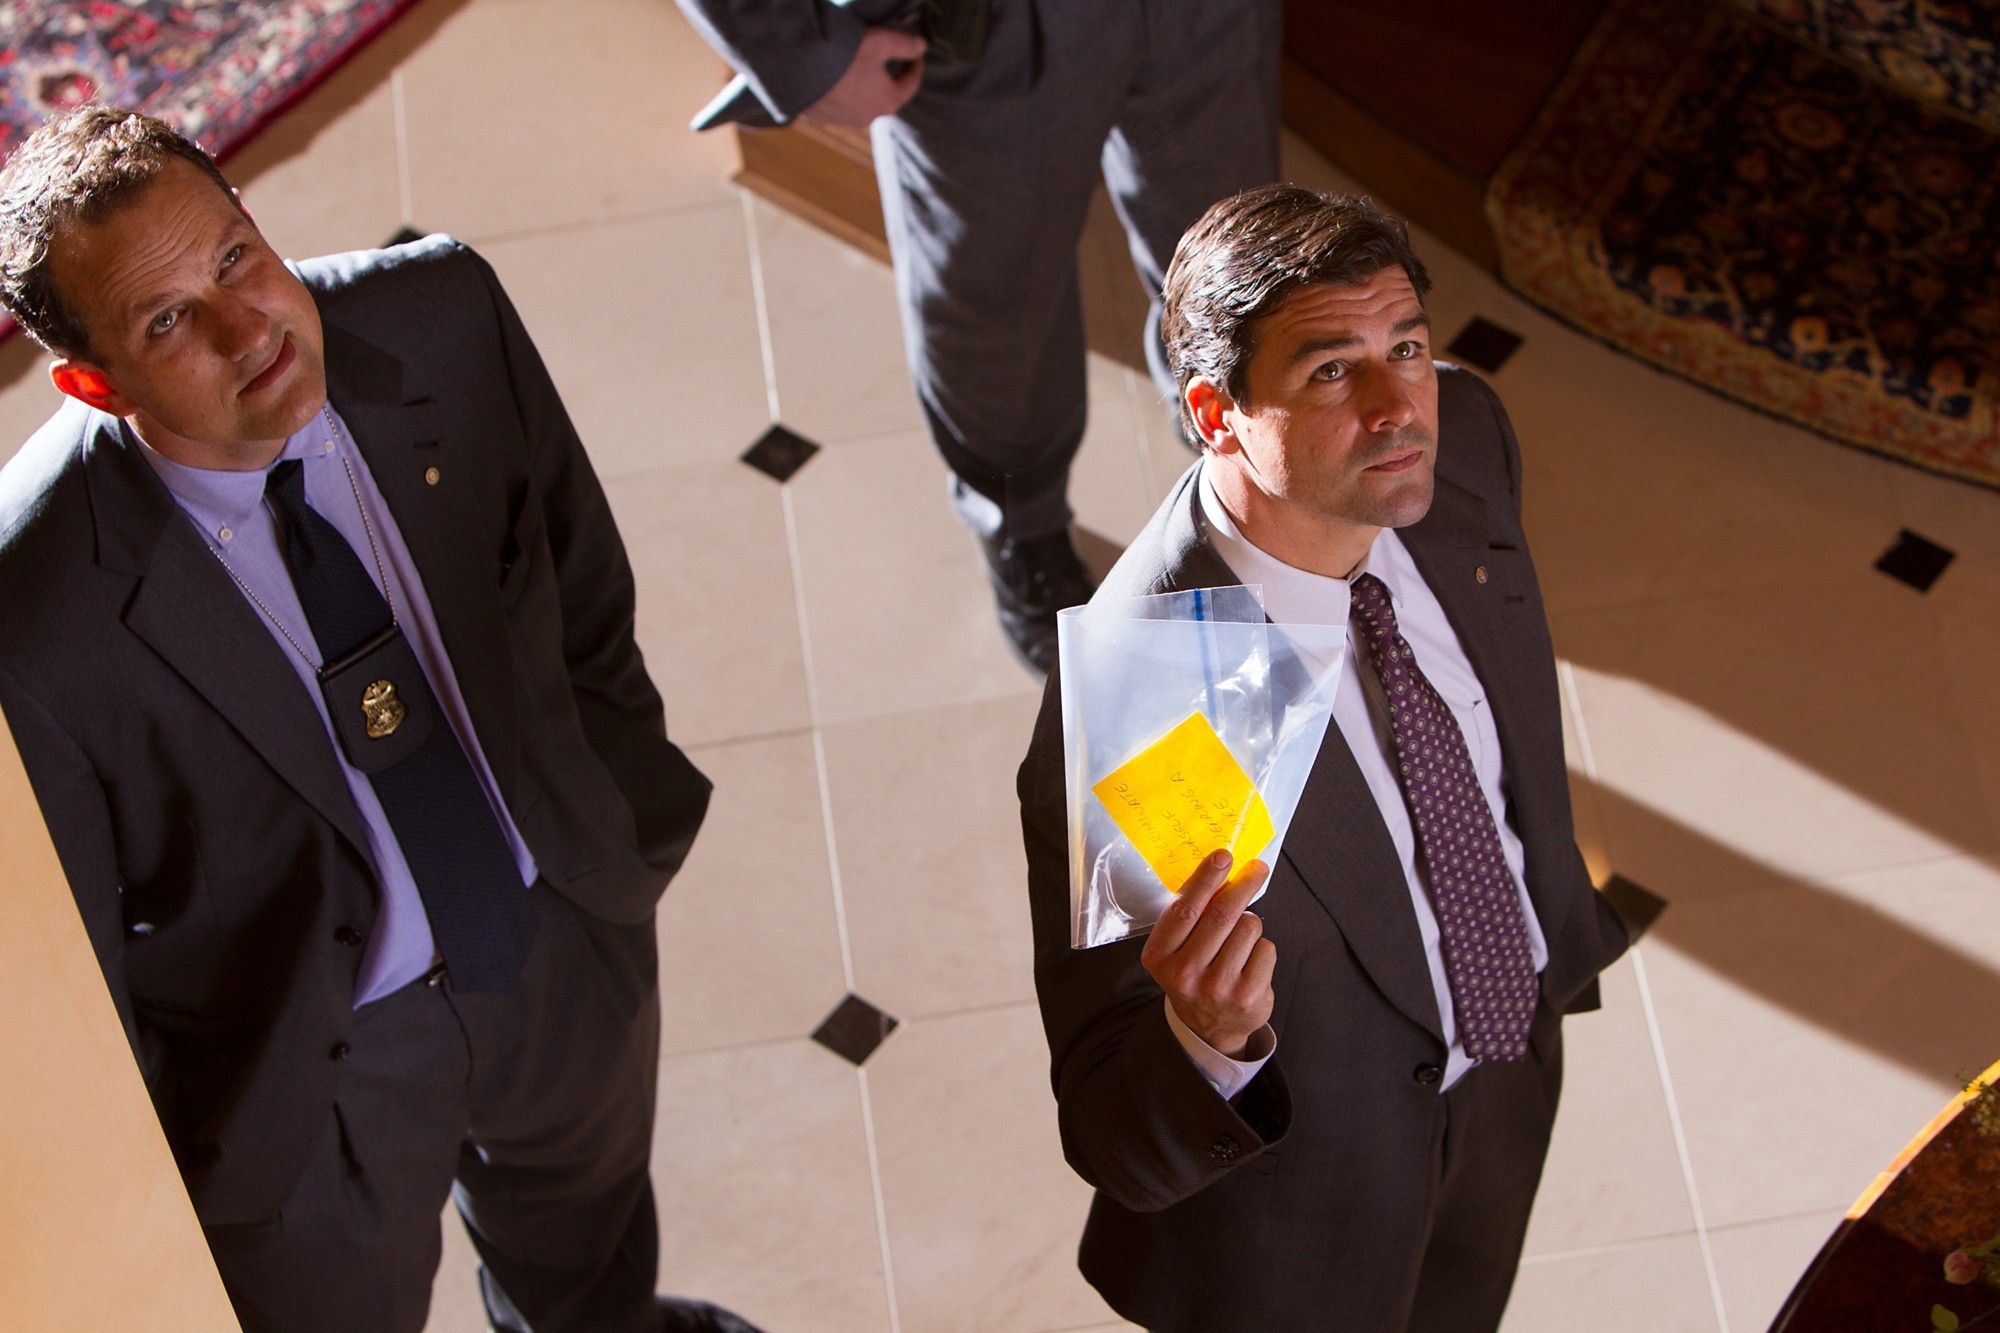 Ted Griffin stars as Agent Hughes and Kyle Chandler stars as Agent Patrick Denham in Paramount Pictures' The Wolf of Wall Street (2013)